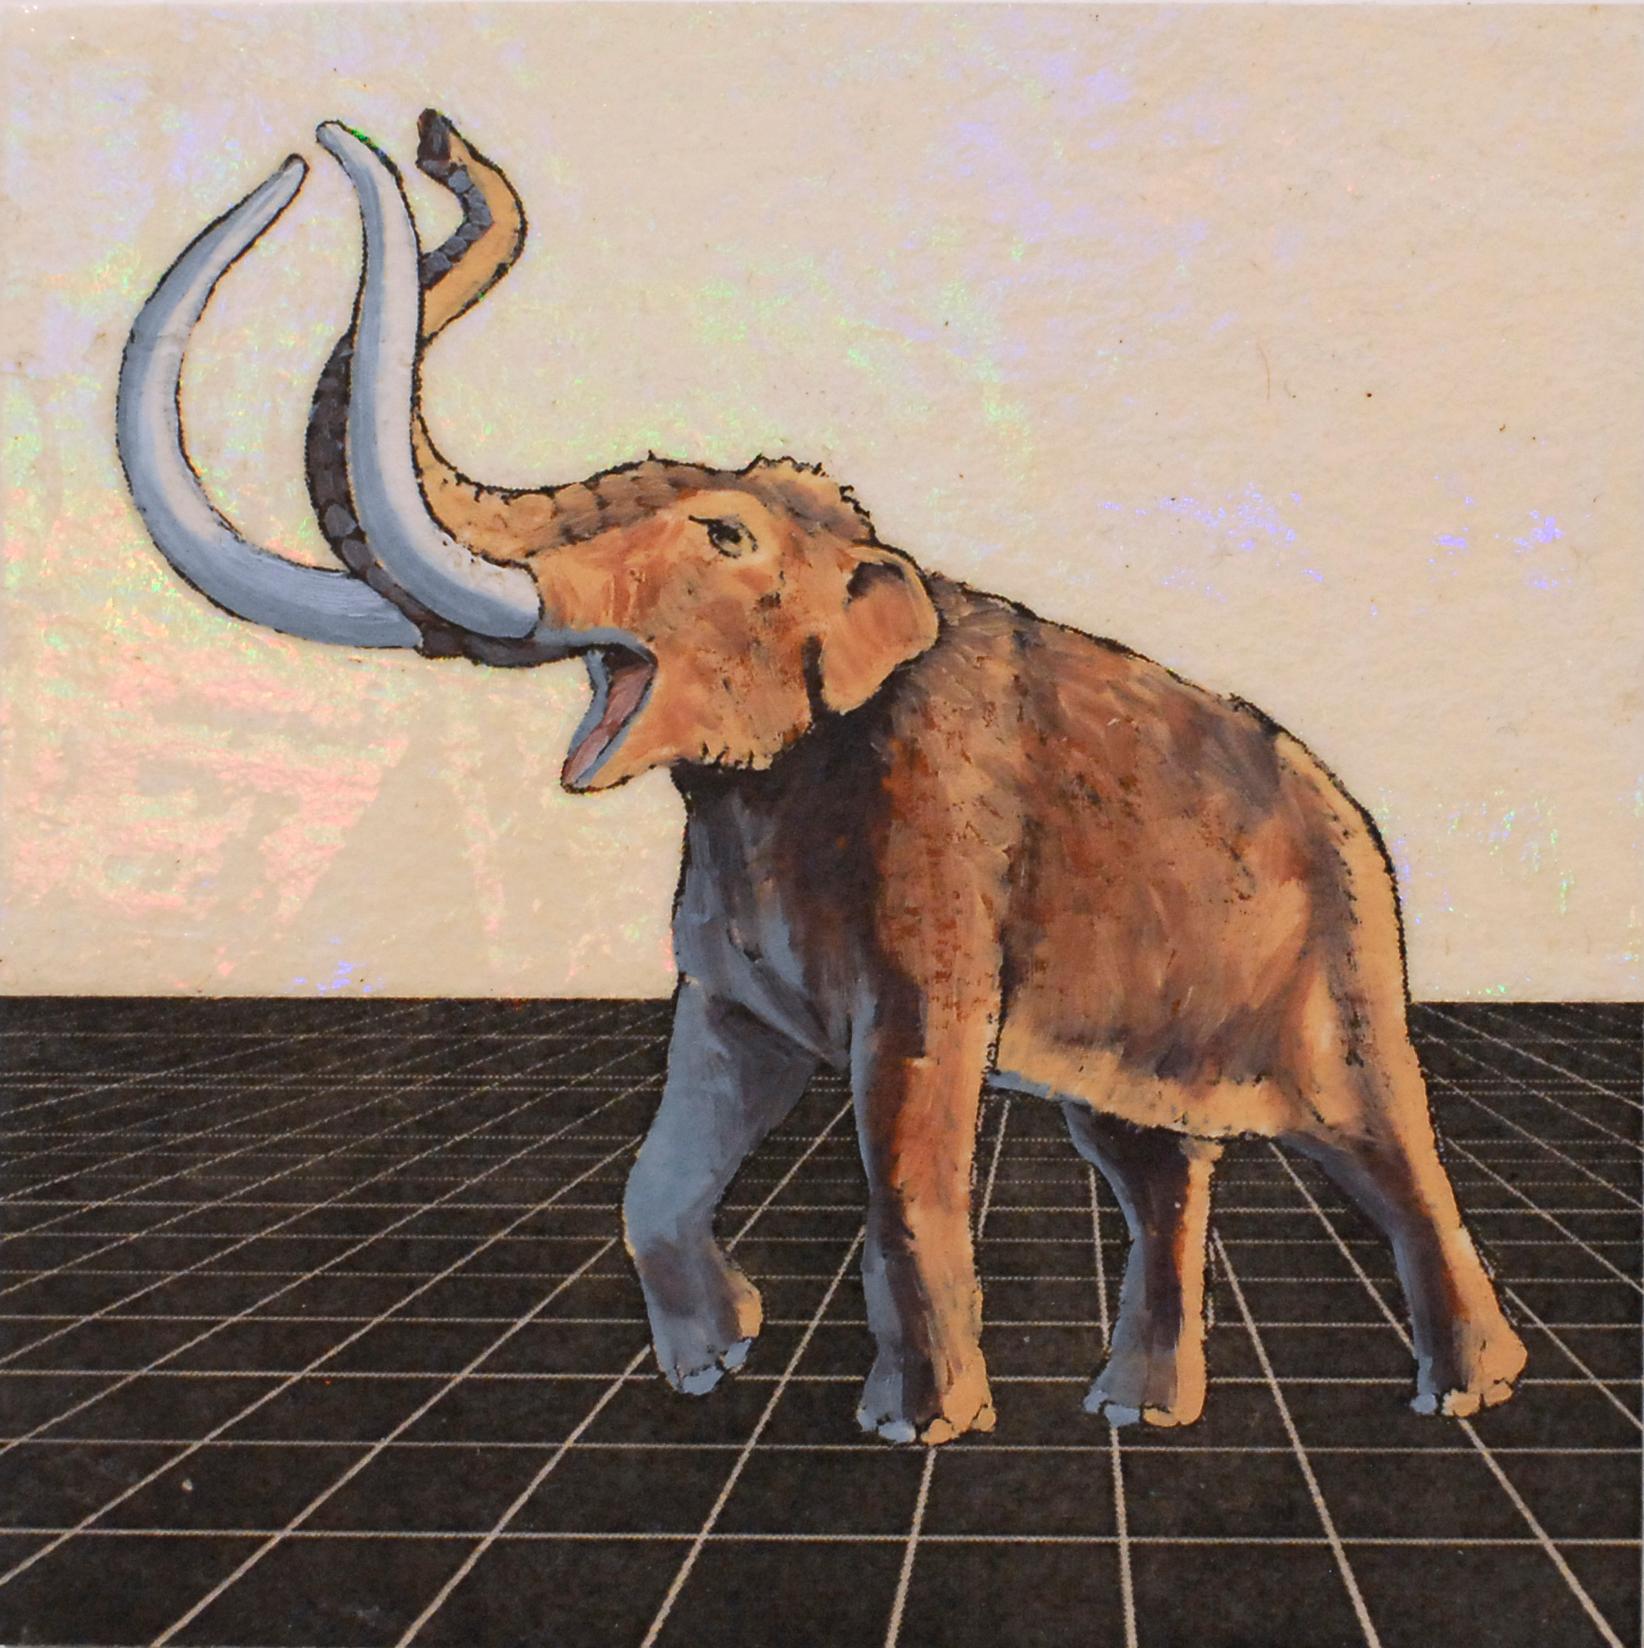 Ice Mammoth, 2019 - Painting by Alexis Kandra